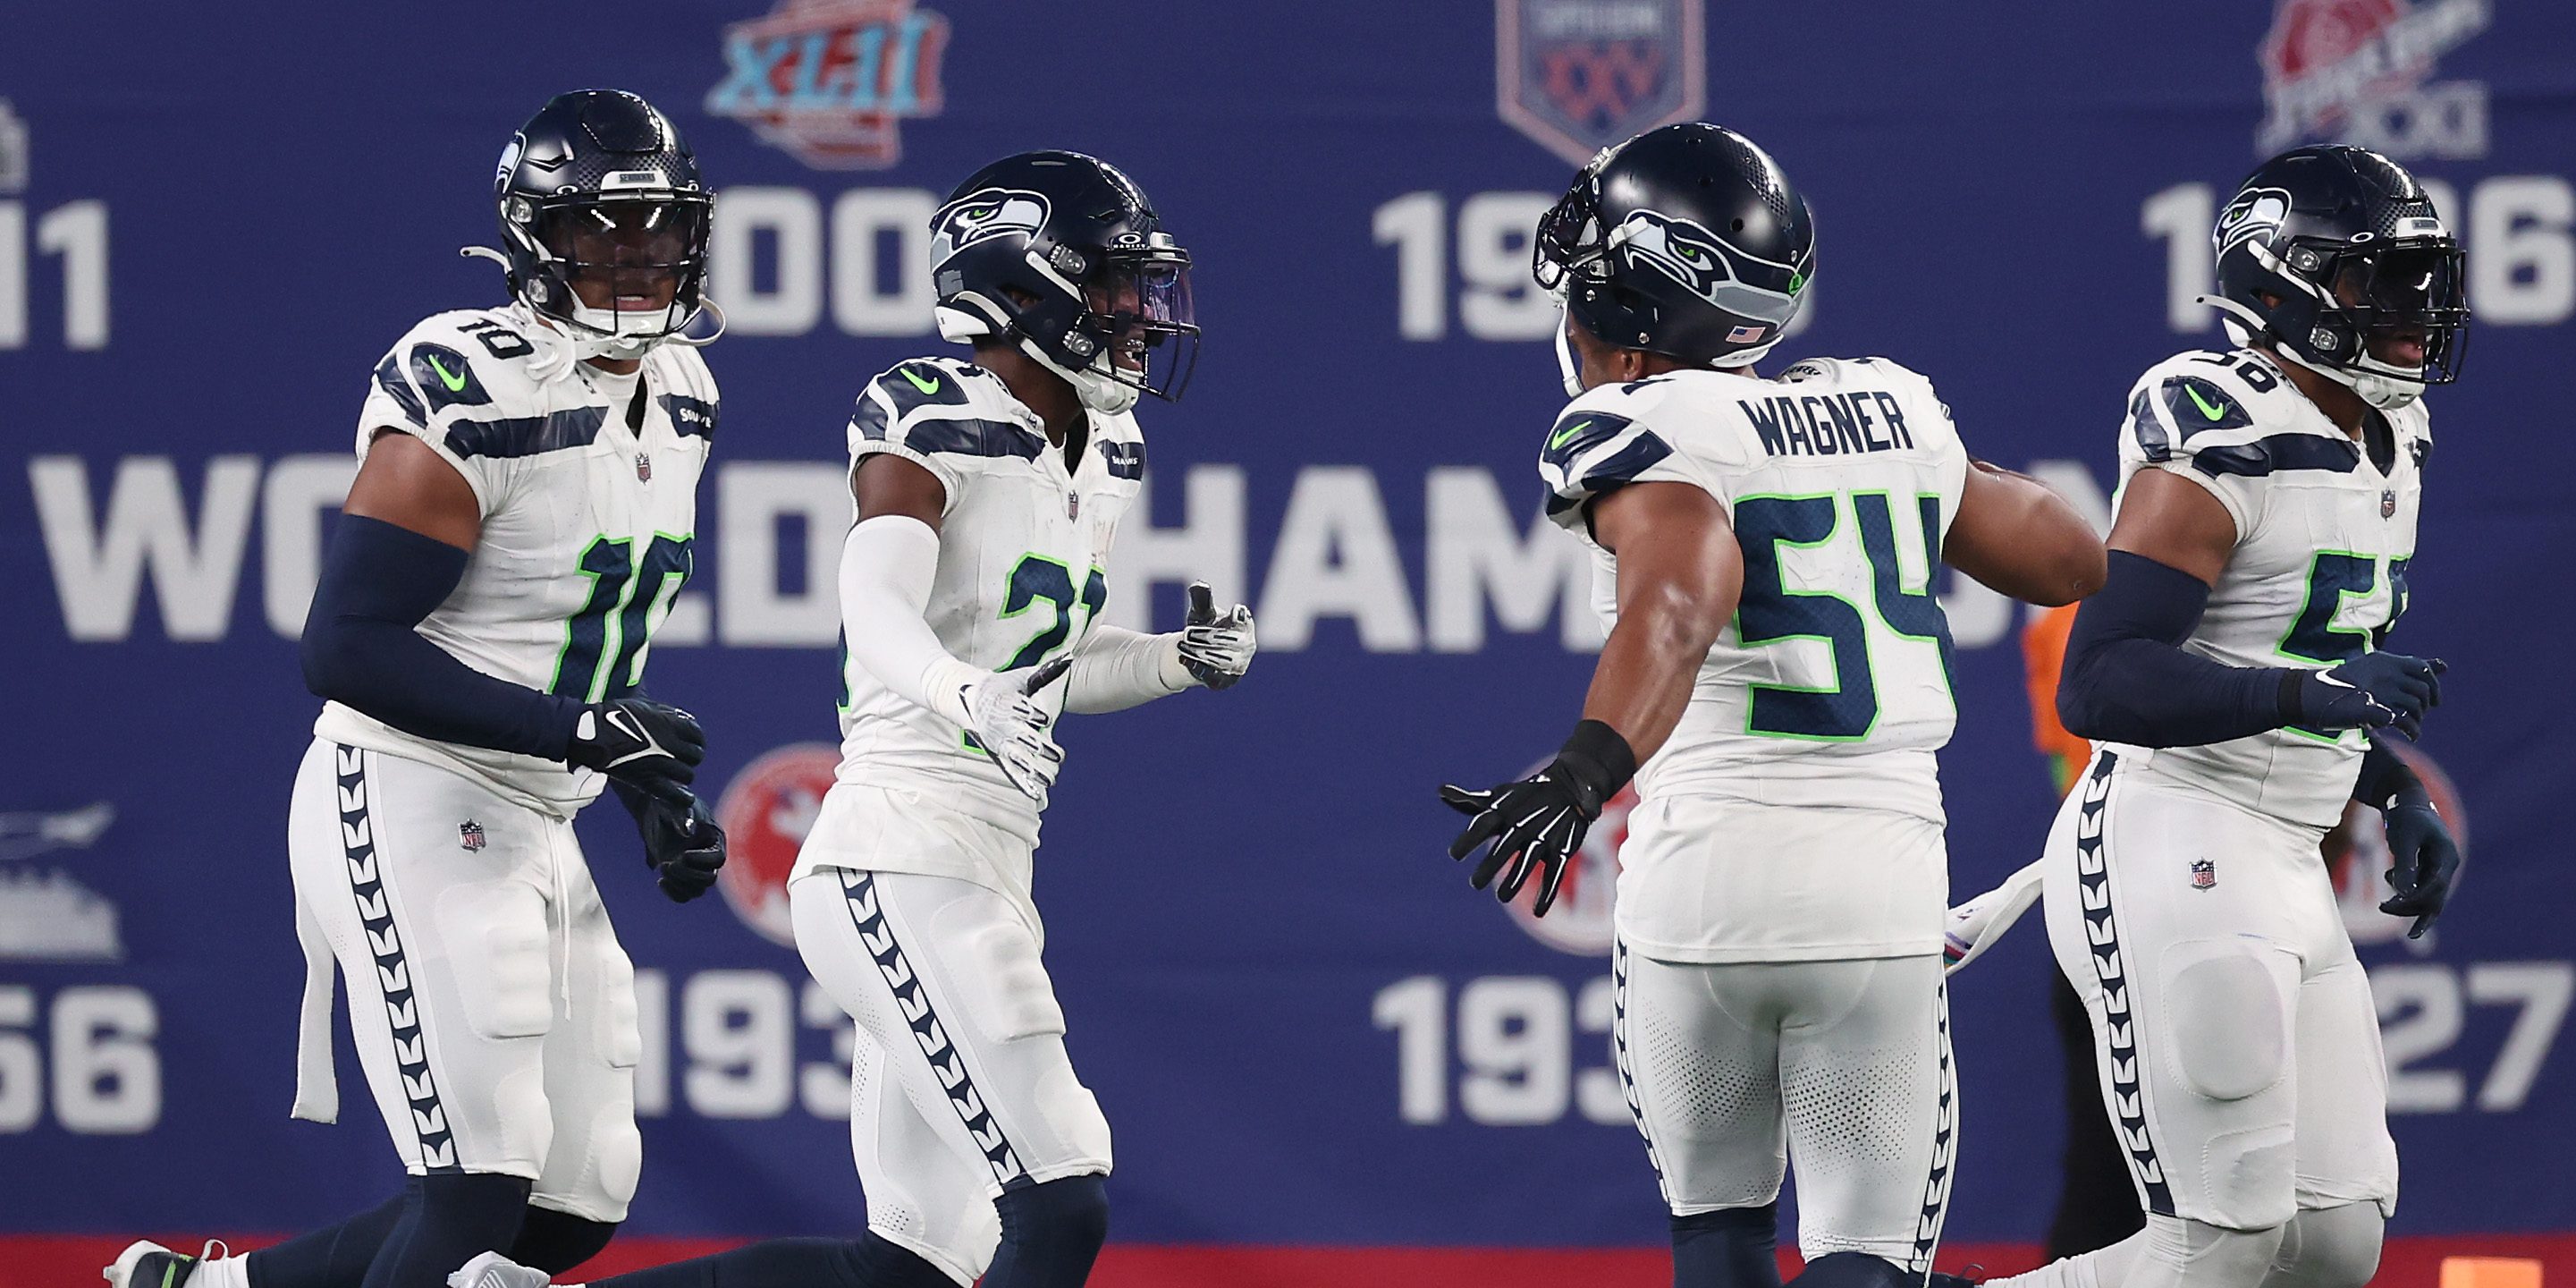 What a win: 3 things we loved about the Seahawks victory over the Giants